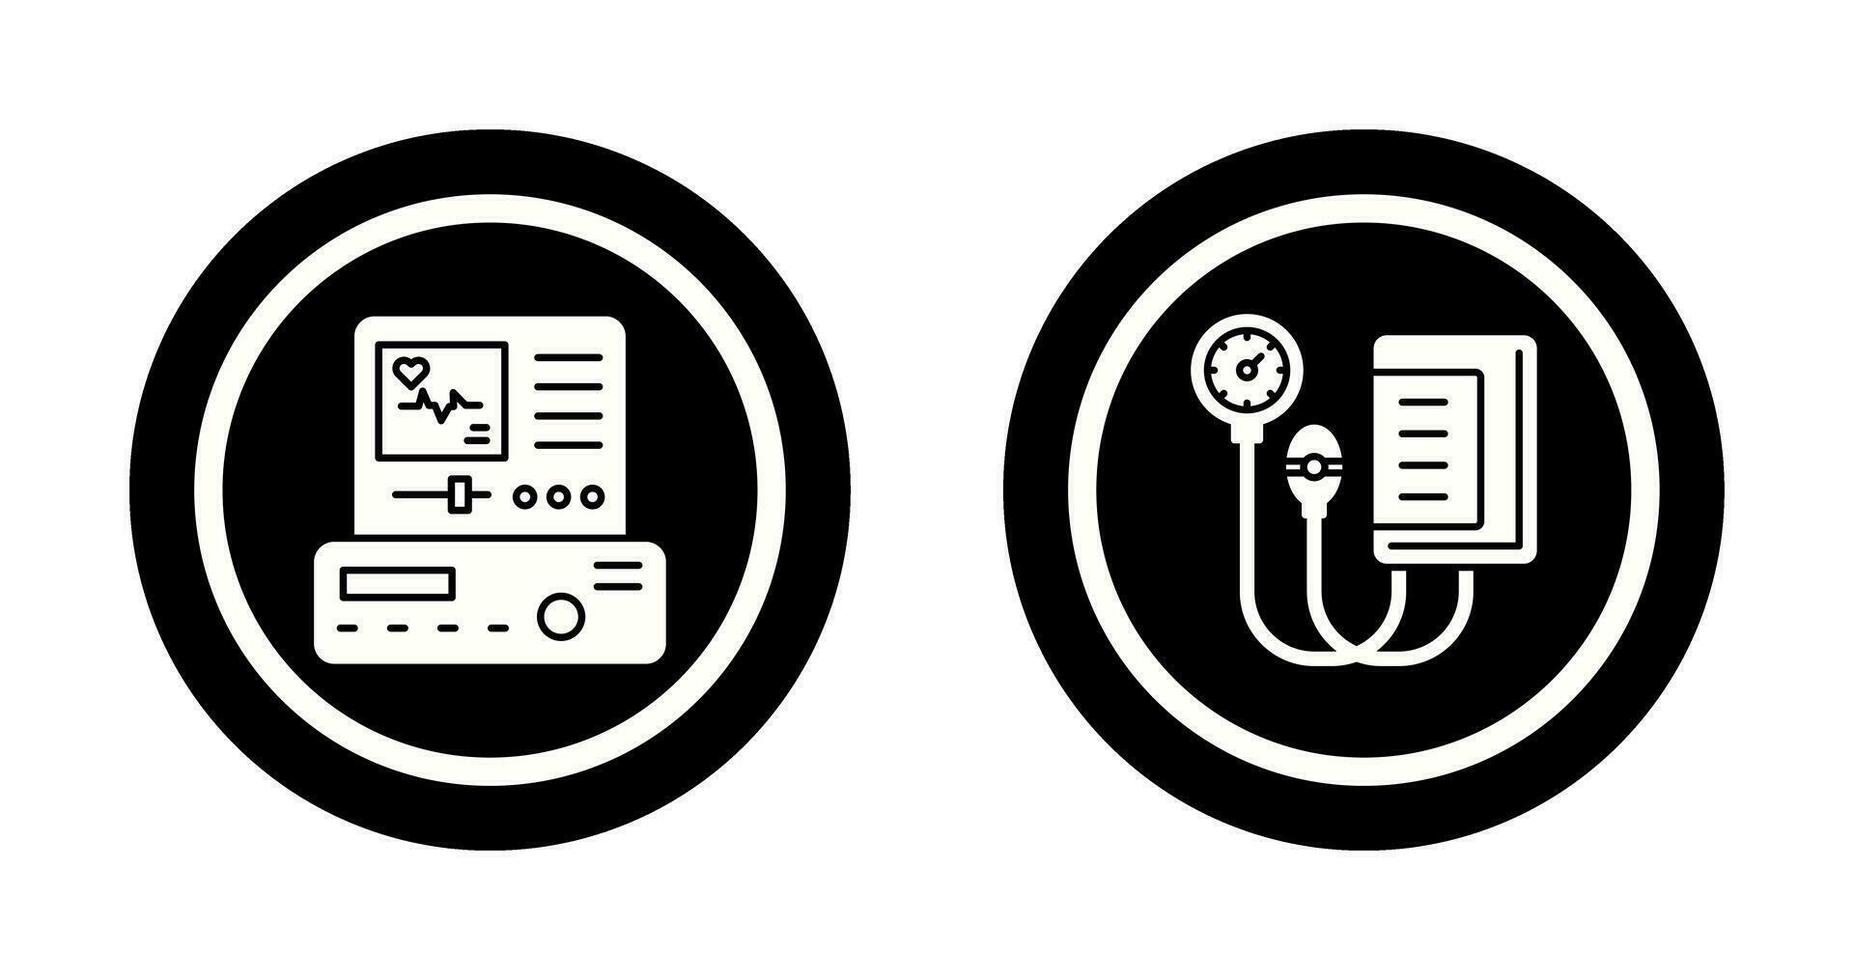 Electrocardiogram and Blood Pressure Gauge Icon vector